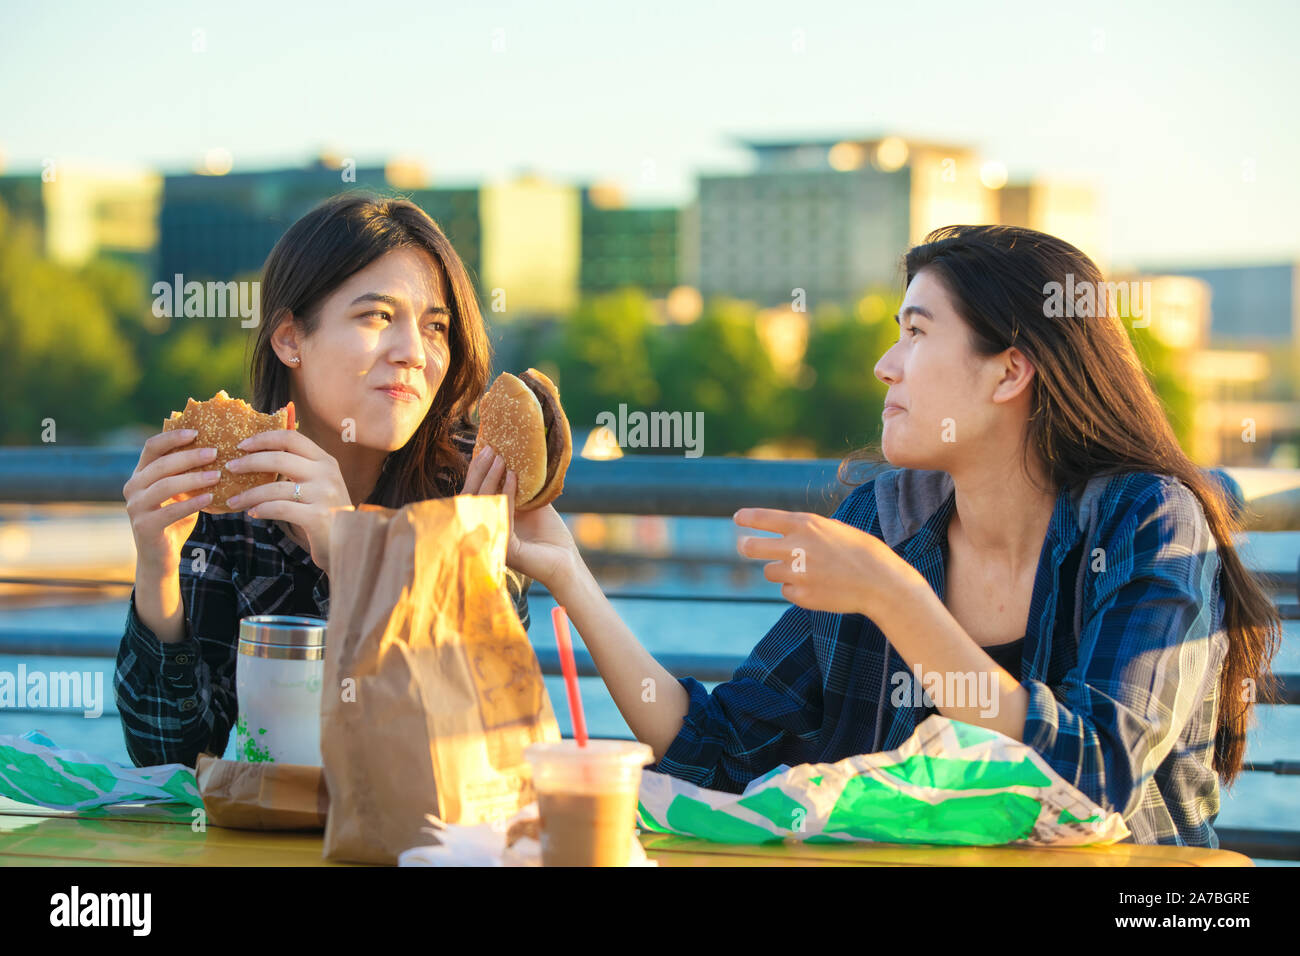 Two biracial Asian, Caucasian  teen girls  or youmg women eating hamburgers outdoors at sunset by lake in urban area, talking and smiling Stock Photo